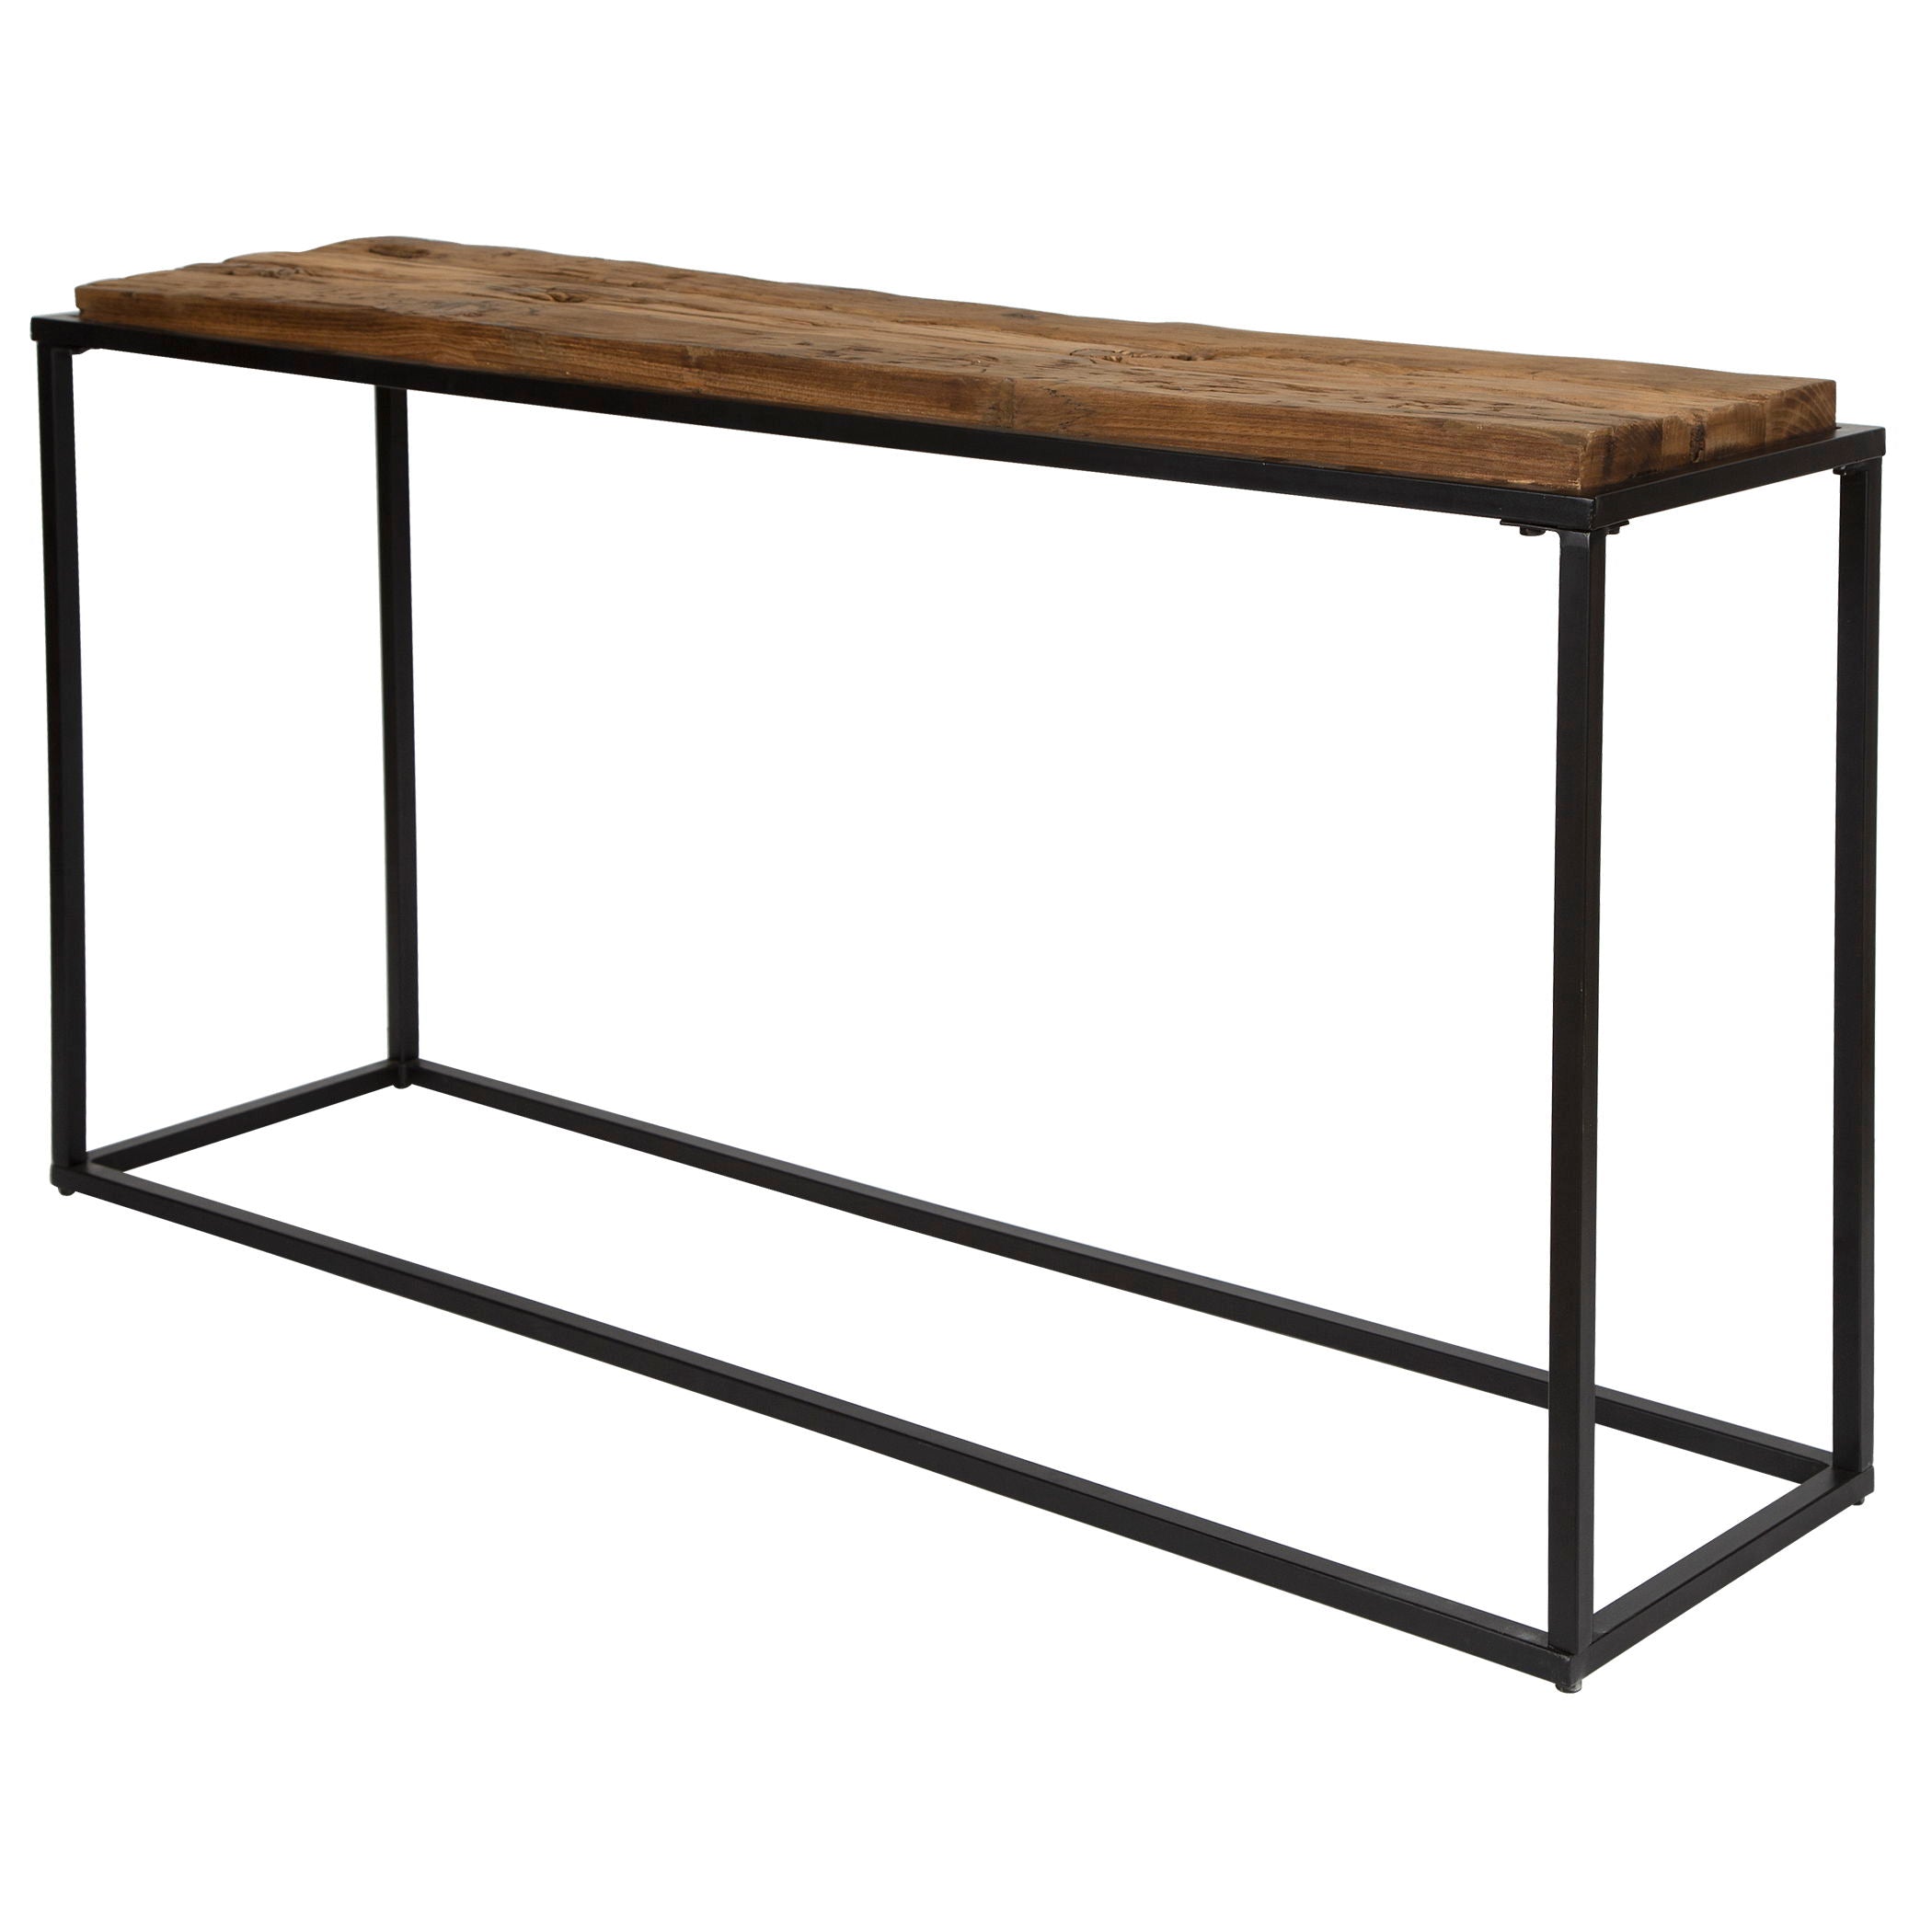 Holston - Salvaged Wood Console Table - Light Brown